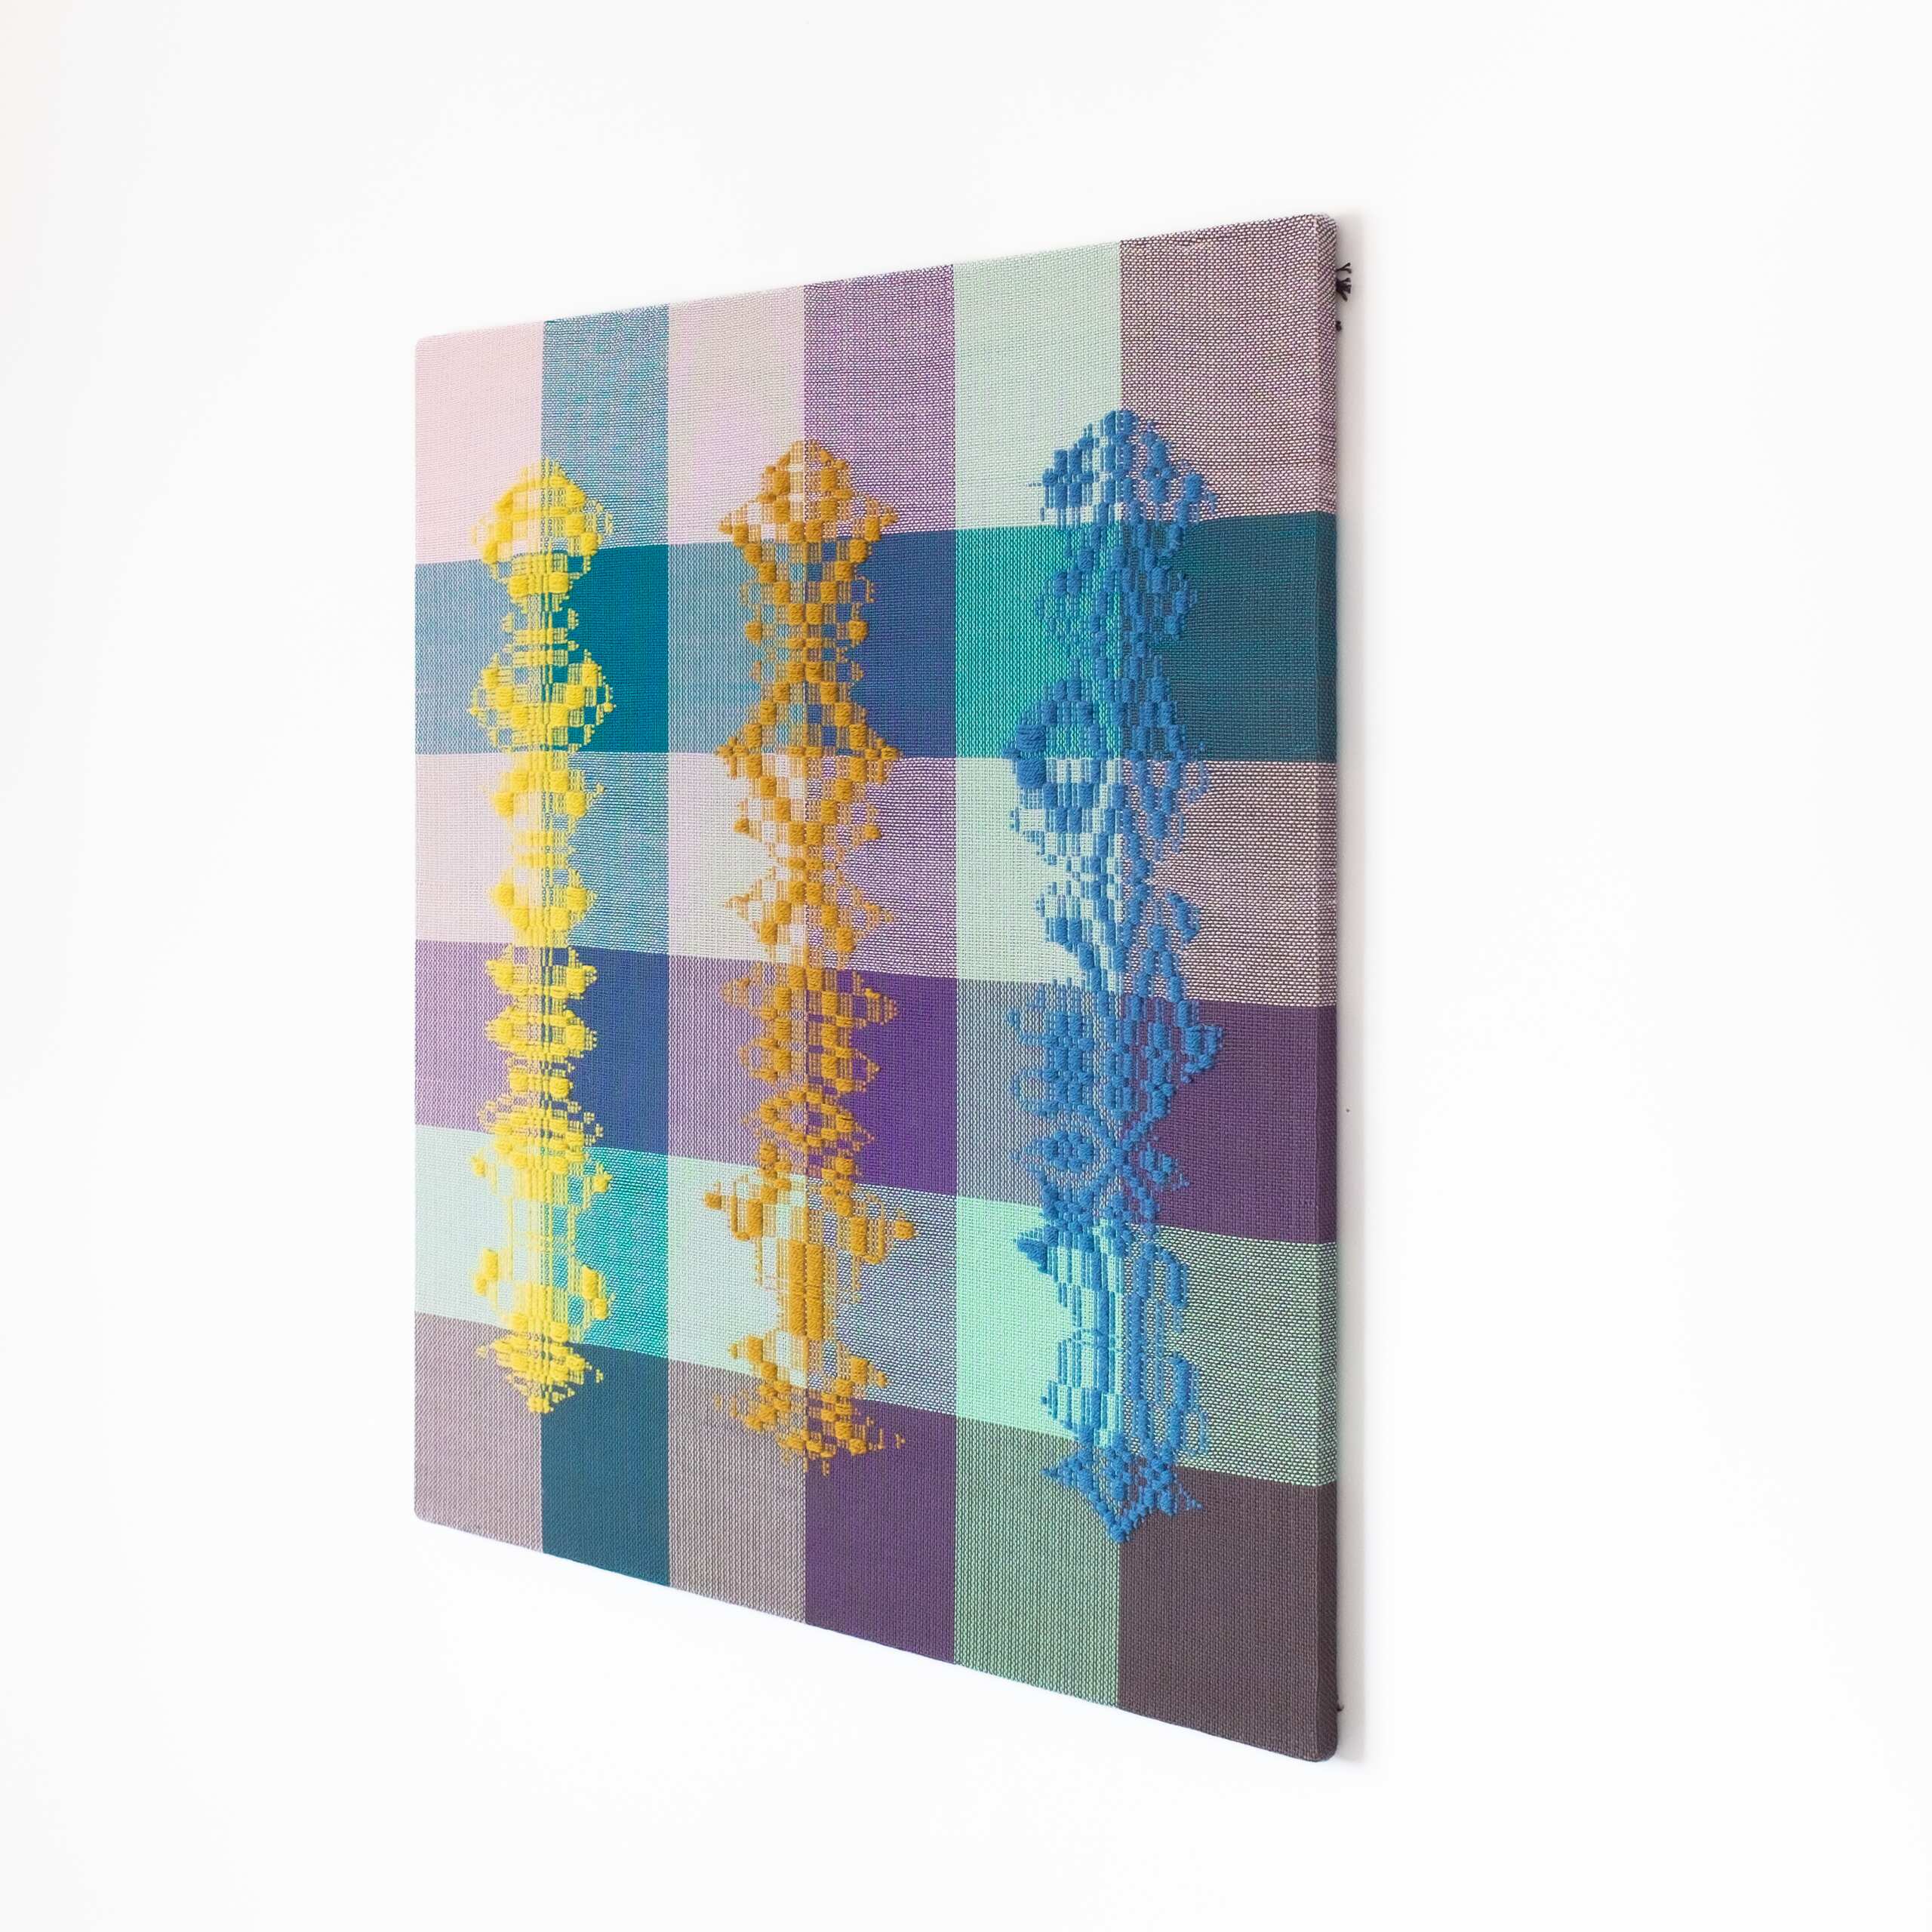 Three beings [yellow-bronze-blue on high-contrast ground], Hand-woven cotton and wool yarn, 2022